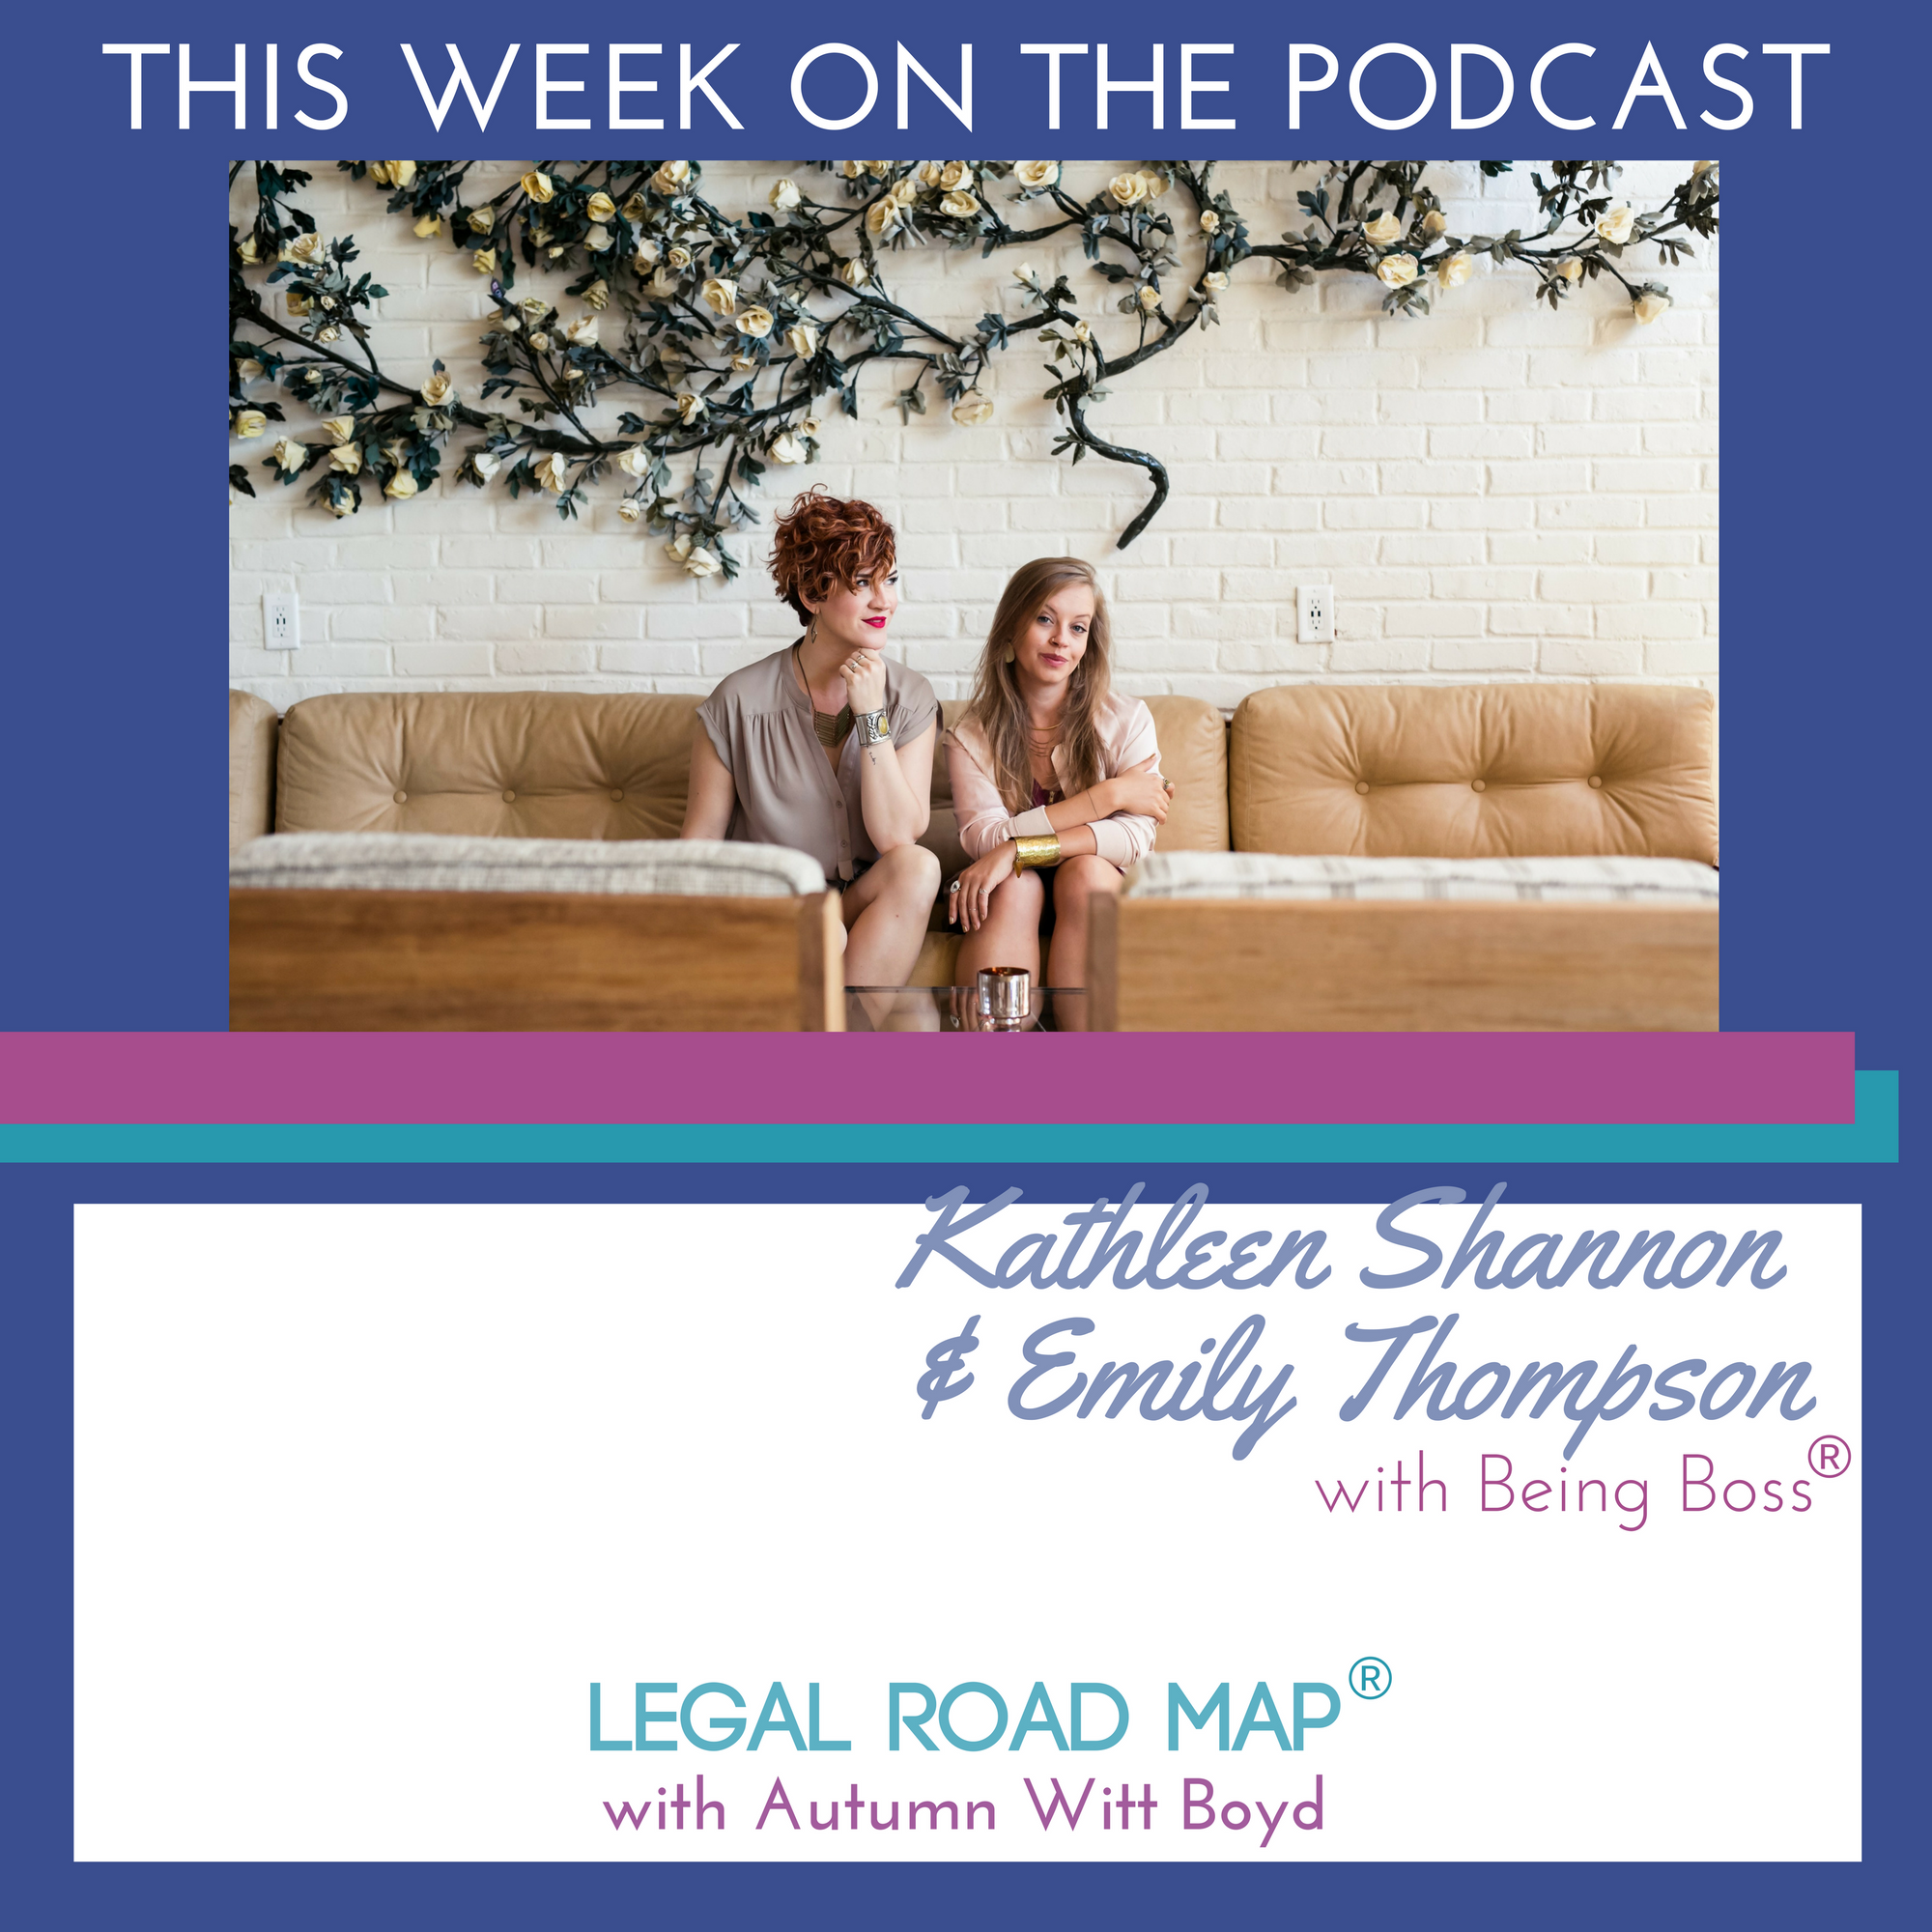 Kathleen Shannon & Emily Thompson on Being Boss® in business (Legal Road Map® Podcast S2E26)